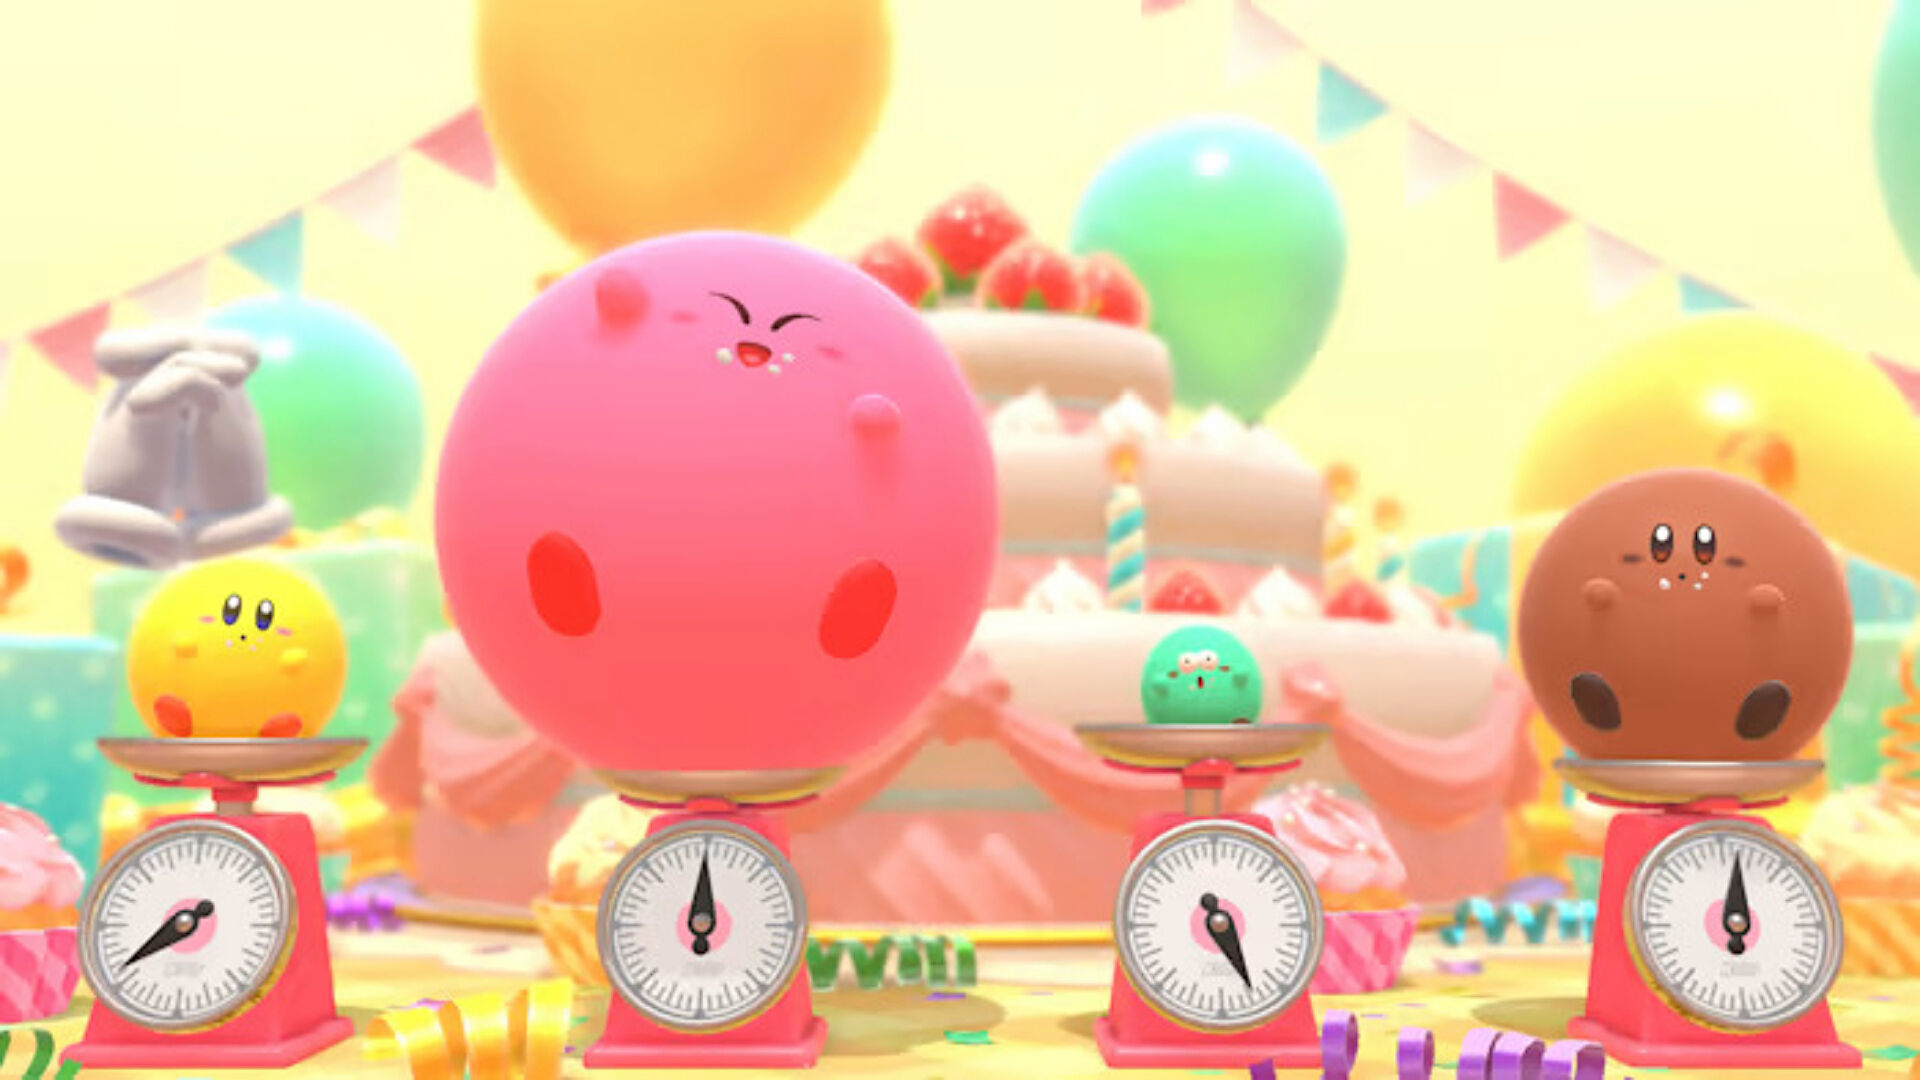 Kirby's Dream Buffet is all about inhaling sweet treats, and releases next week